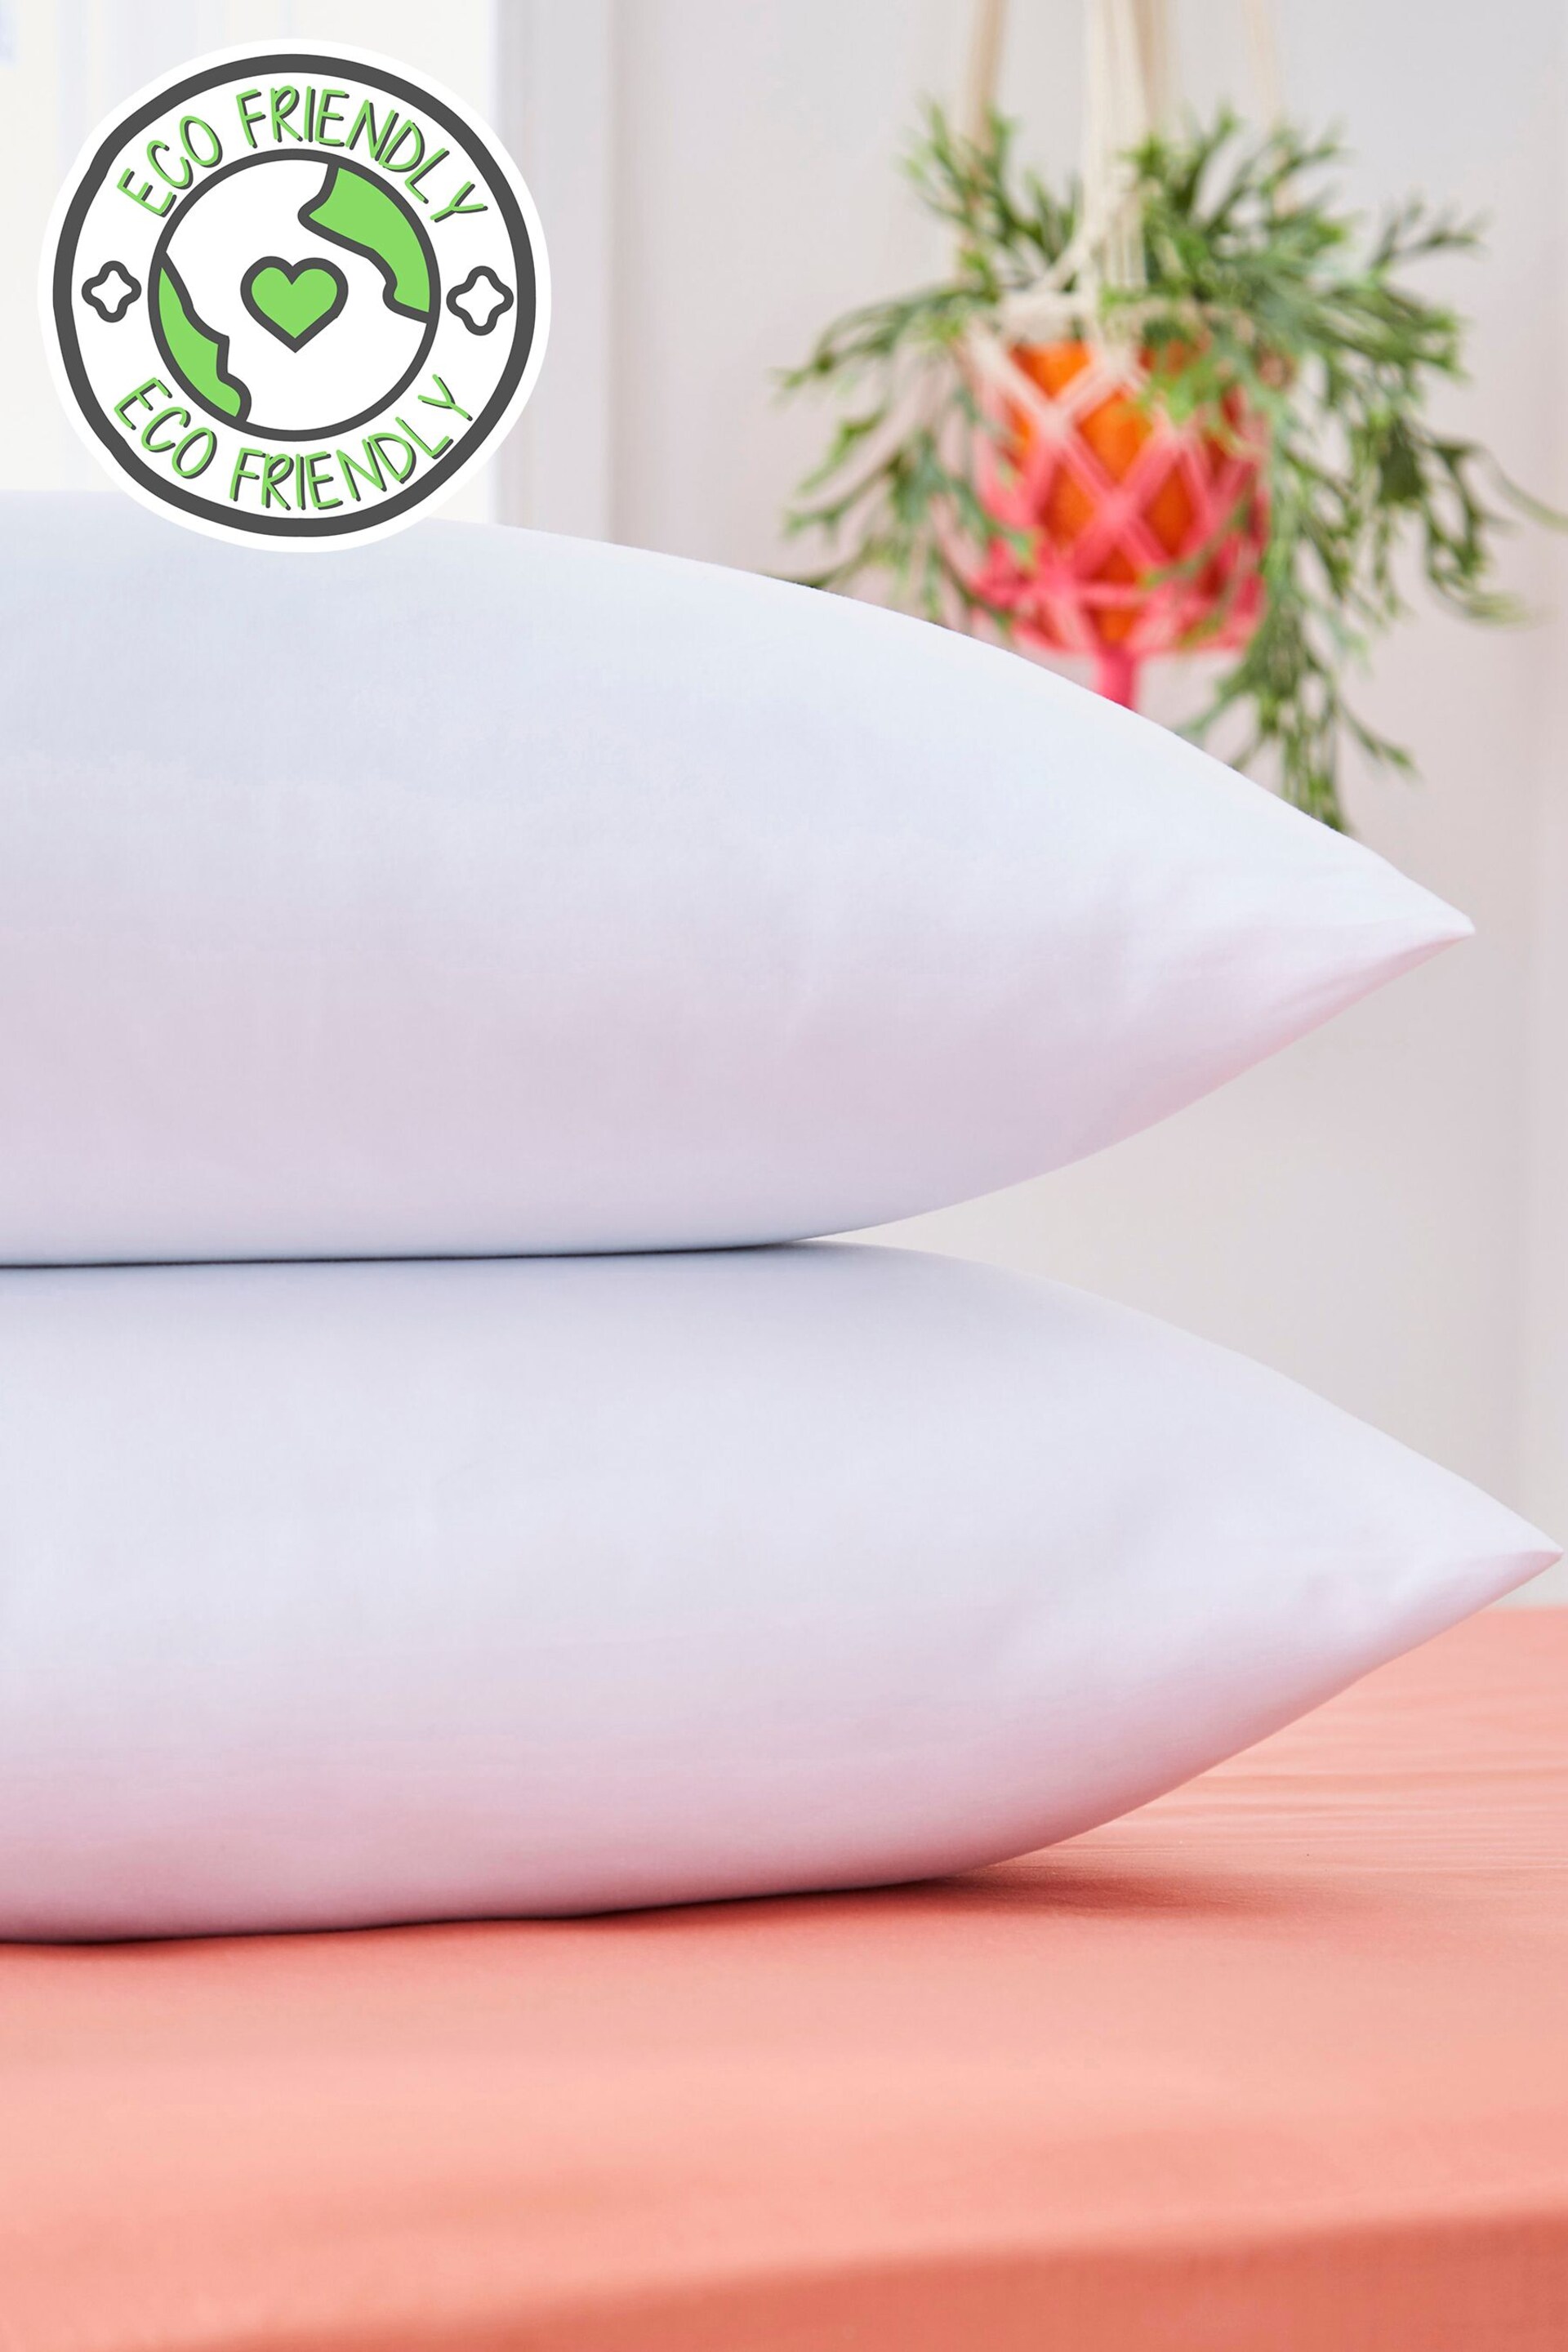 Snug Snuggle Up Pillows - 2 Pack - Image 1 of 10